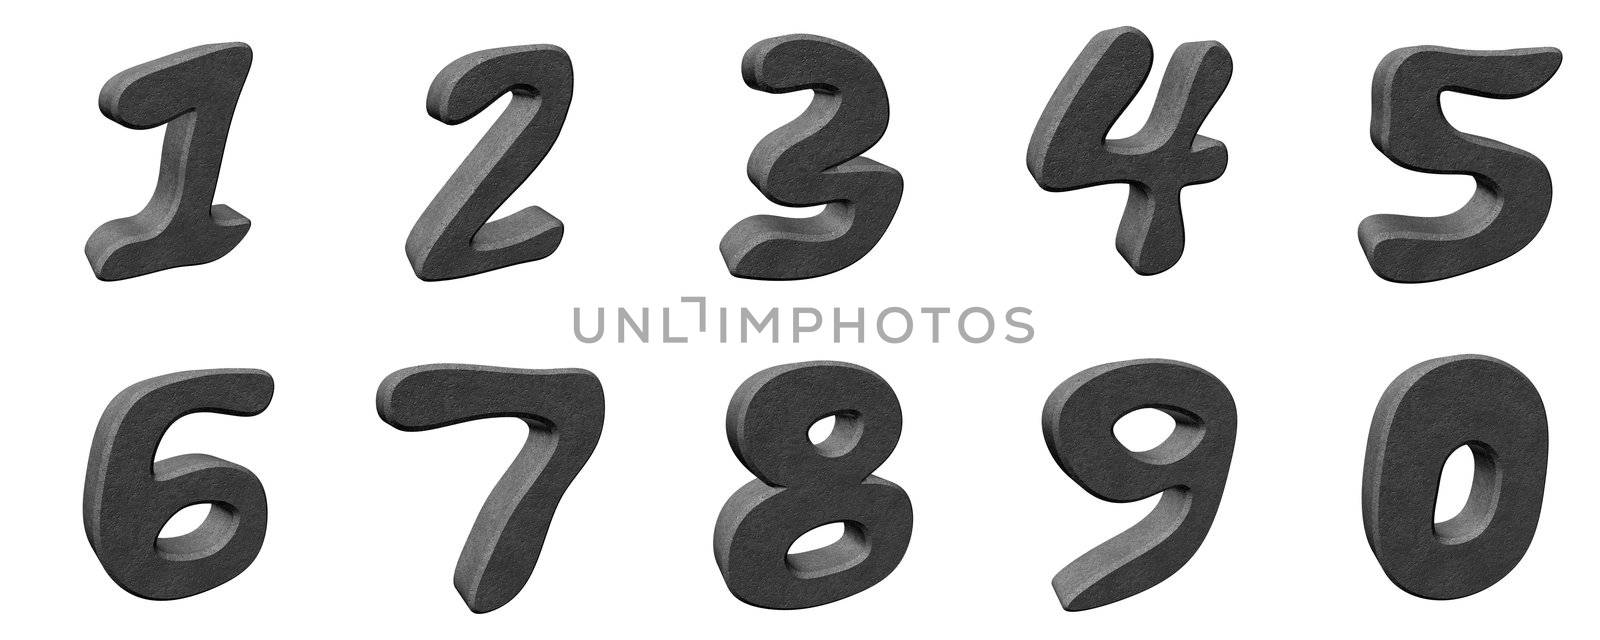 Set of 3d numbers - gray concrete material